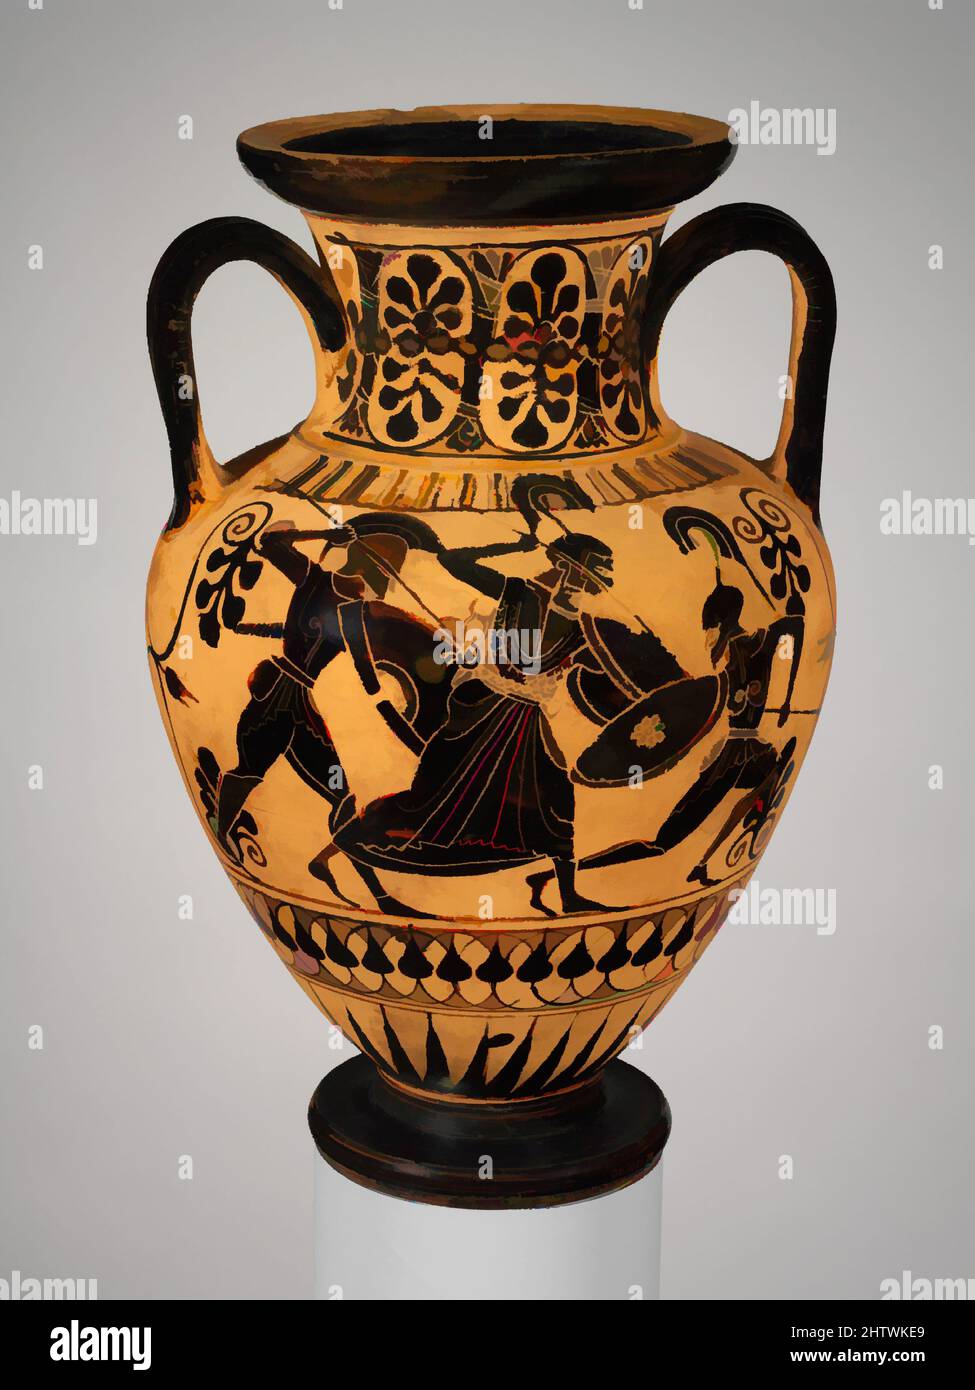 Art inspired by Terracotta neck-amphora (jar), Archaic, ca. 525–500 B.C., Greek, Attic, Terracotta; black-figure, H. 9 1/4 in. (23.5cm.), Vases, Obverse, Athena, Herakles leading Kerberos, and Hermes, Reverse, Battle of gods and giants. According to myth, Kerberos, the guard dog of, Classic works modernized by Artotop with a splash of modernity. Shapes, color and value, eye-catching visual impact on art. Emotions through freedom of artworks in a contemporary way. A timeless message pursuing a wildly creative new direction. Artists turning to the digital medium and creating the Artotop NFT Stock Photo